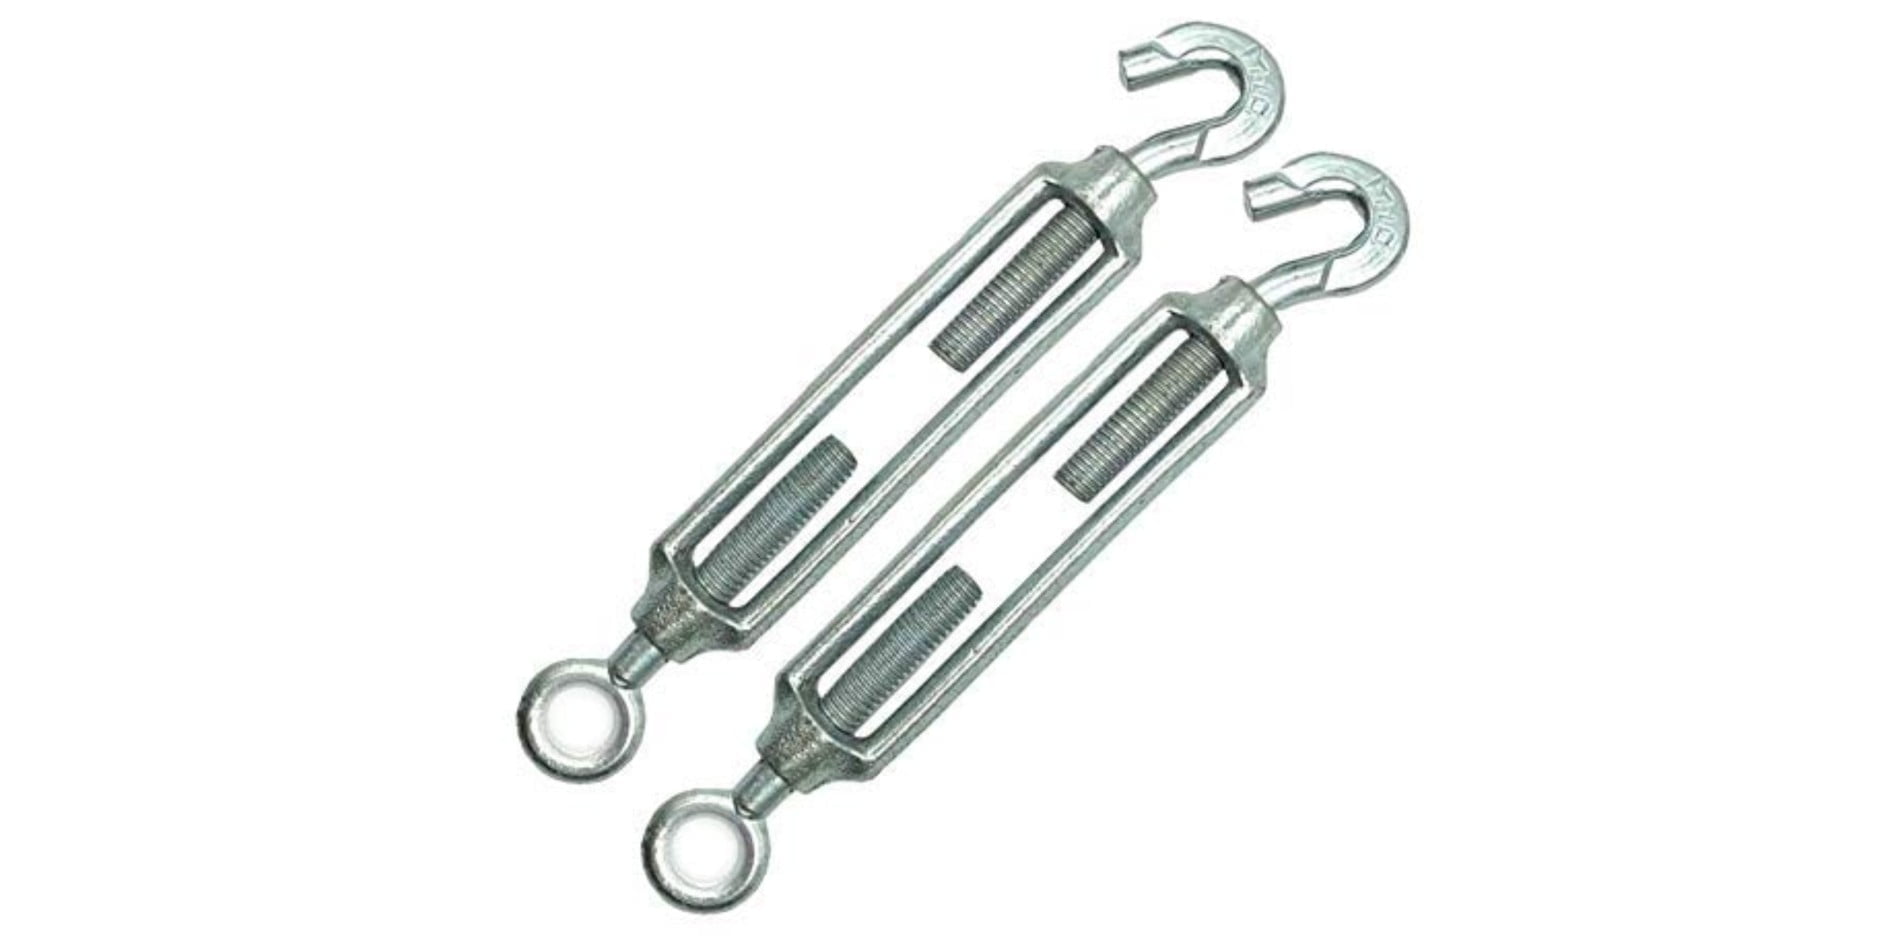 SVIBO Industries-Best Heavy duty turnbuckle manufacturers in India